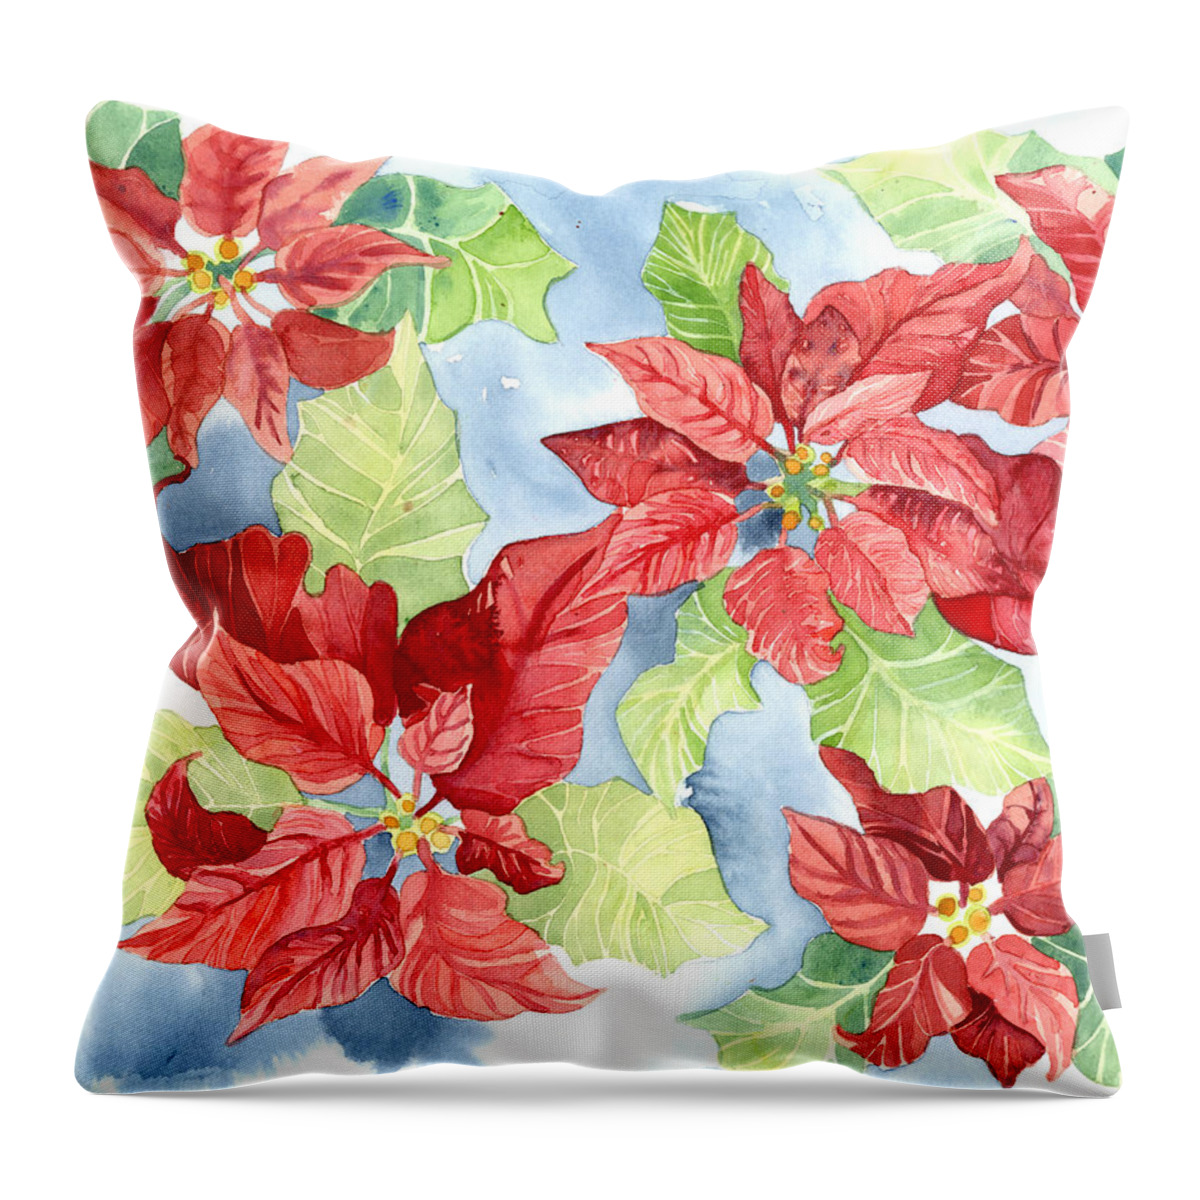 Poinsettia Throw Pillow featuring the painting Watercolor Poinsettias Christmas Decor by Audrey Jeanne Roberts